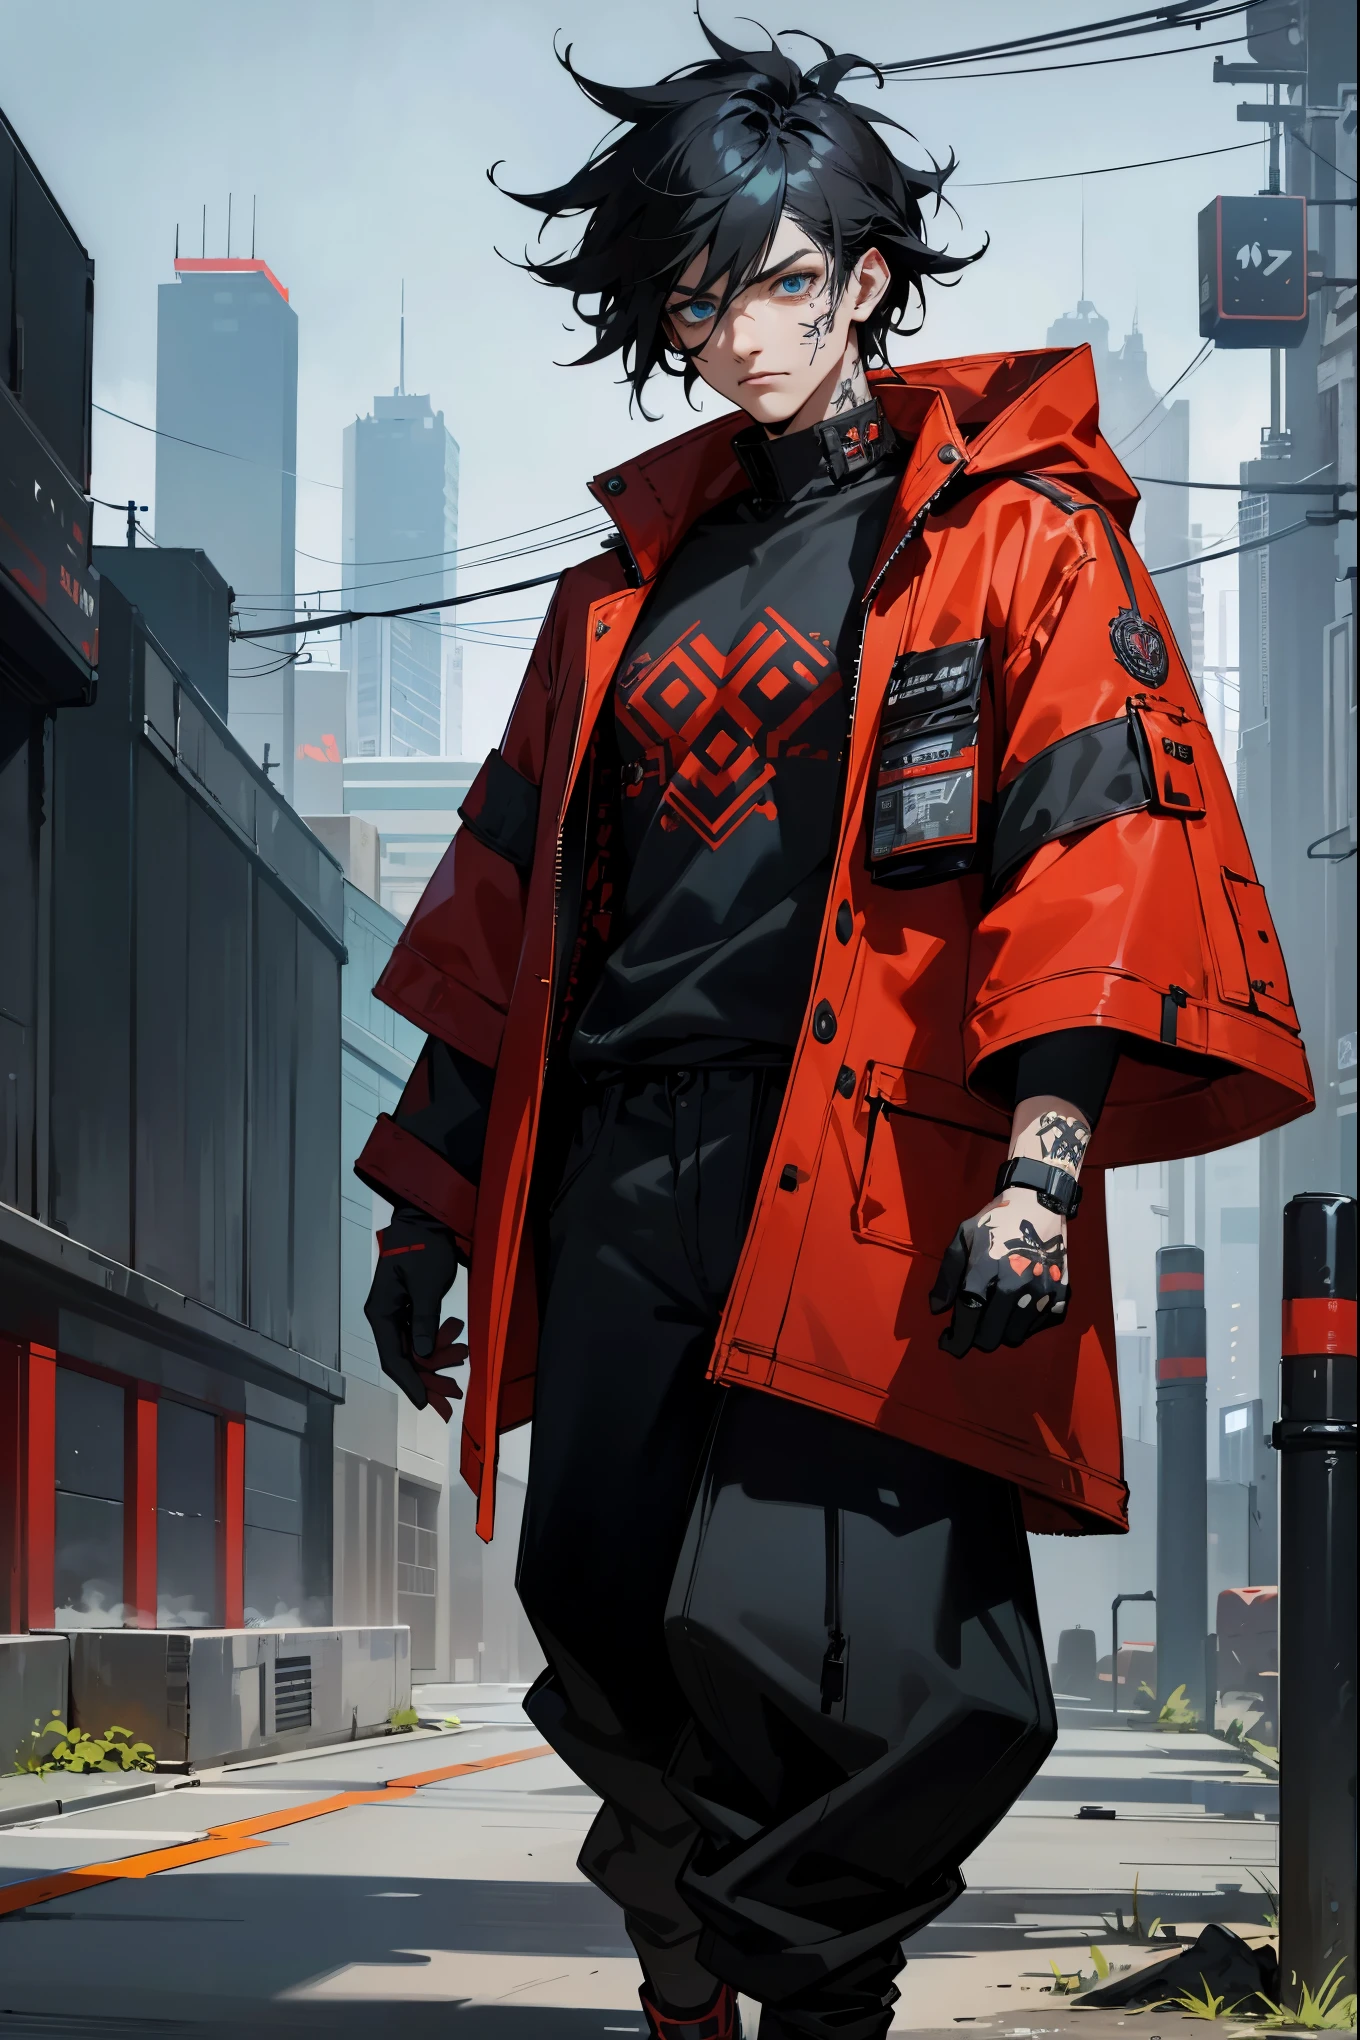 1male, black hair, blue eyes, messy hair, cyberpunk face implant, neck and arm tattoos, modern clothing, red overcoat, black baggy pants, city background, walking on path, detailed background, detailed face, expressionless